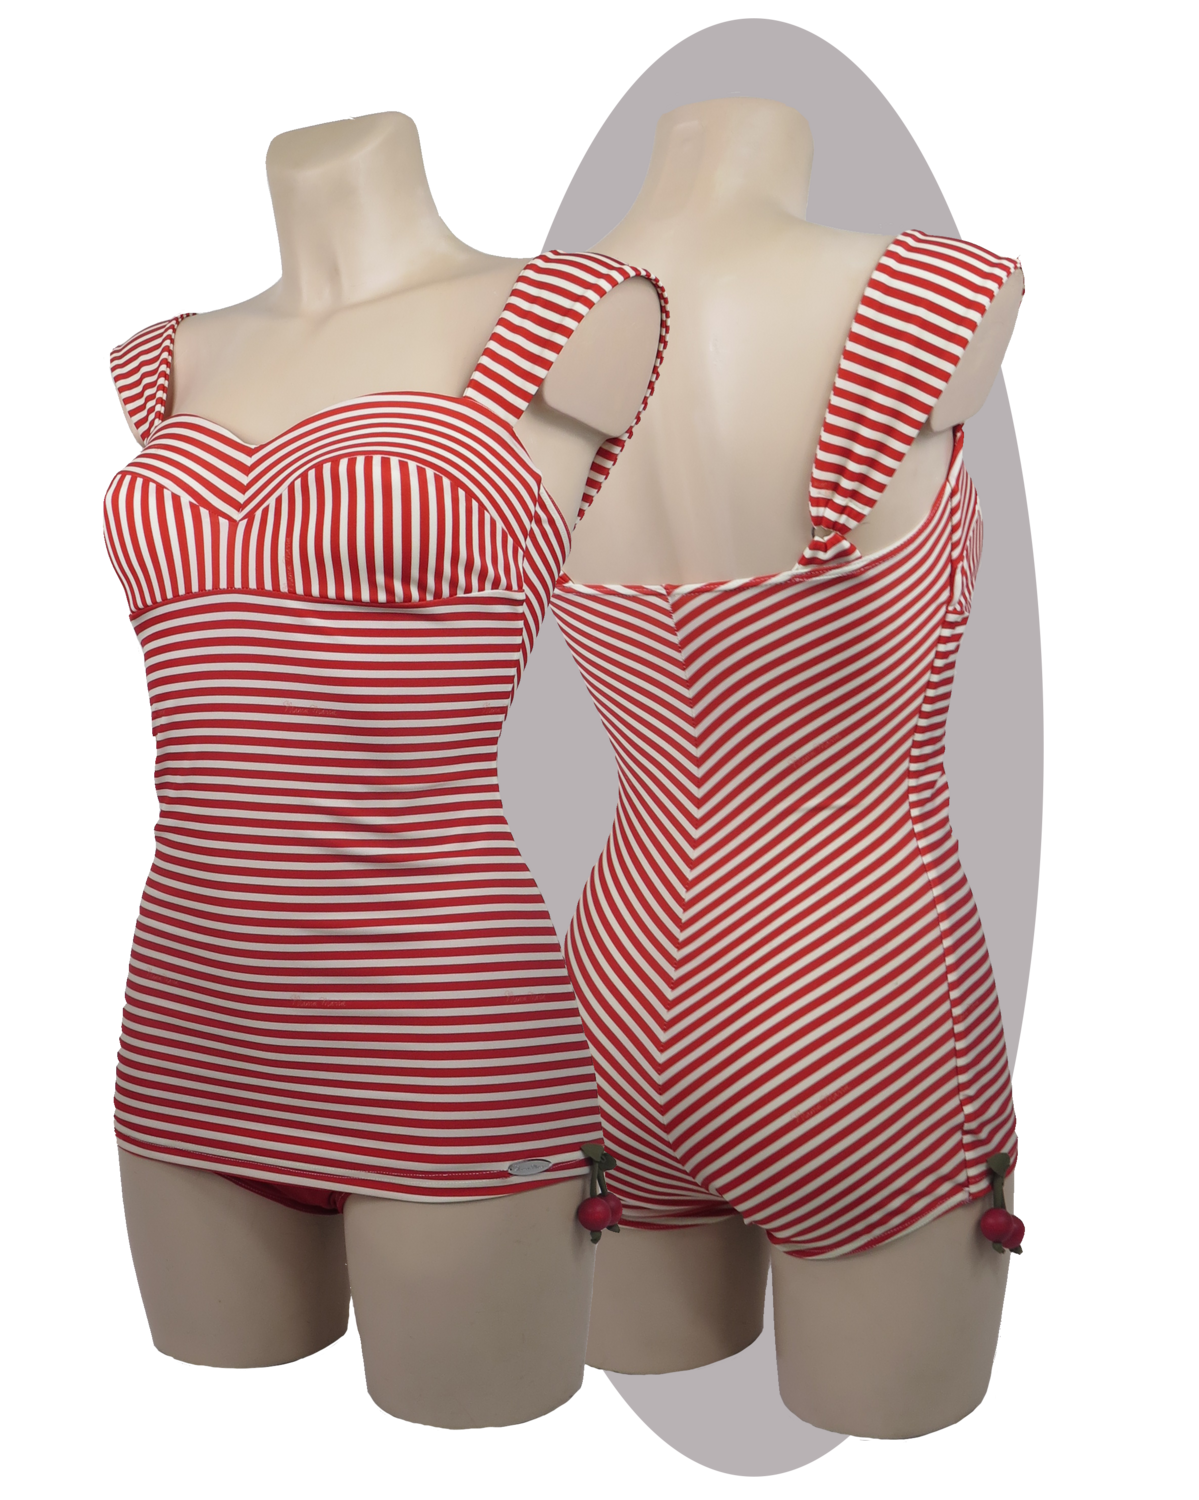 Bathing suit Audrey, red striped